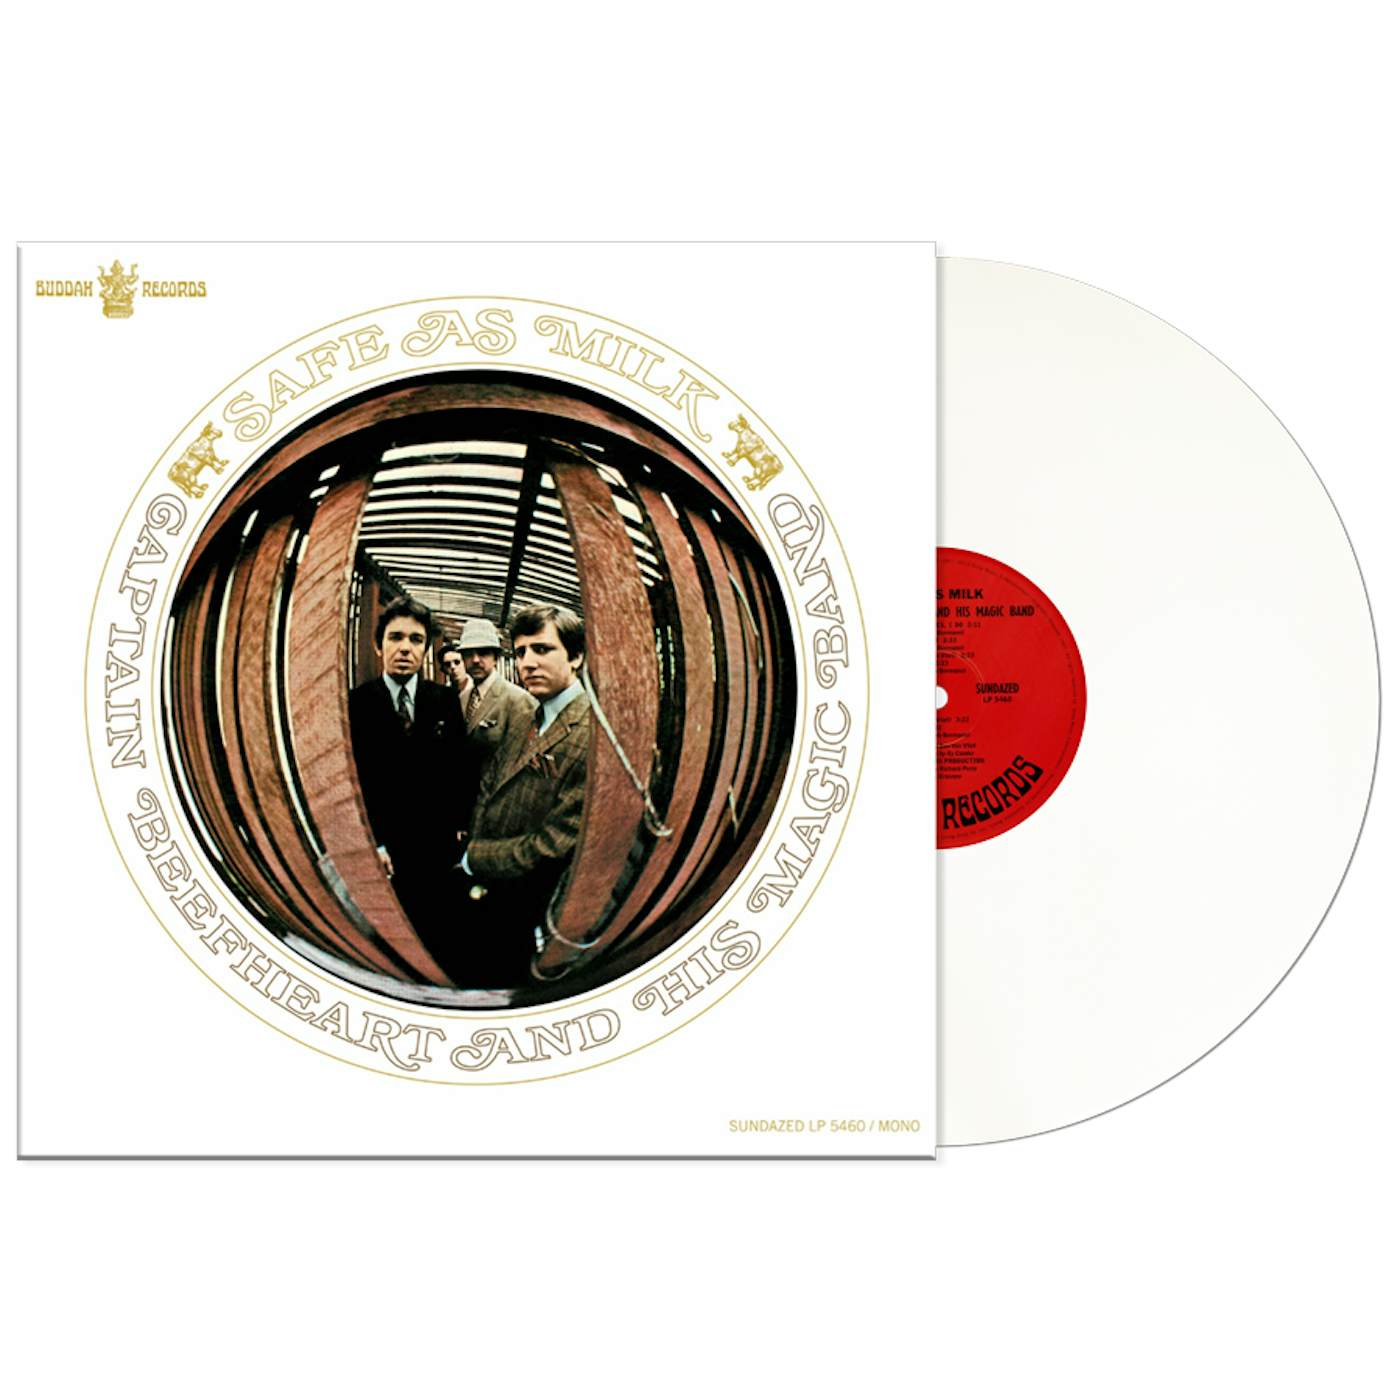 Captain Beefheart & His Magic Band SAFE AS MILK - Limited Edition White Colored Vinyl Record